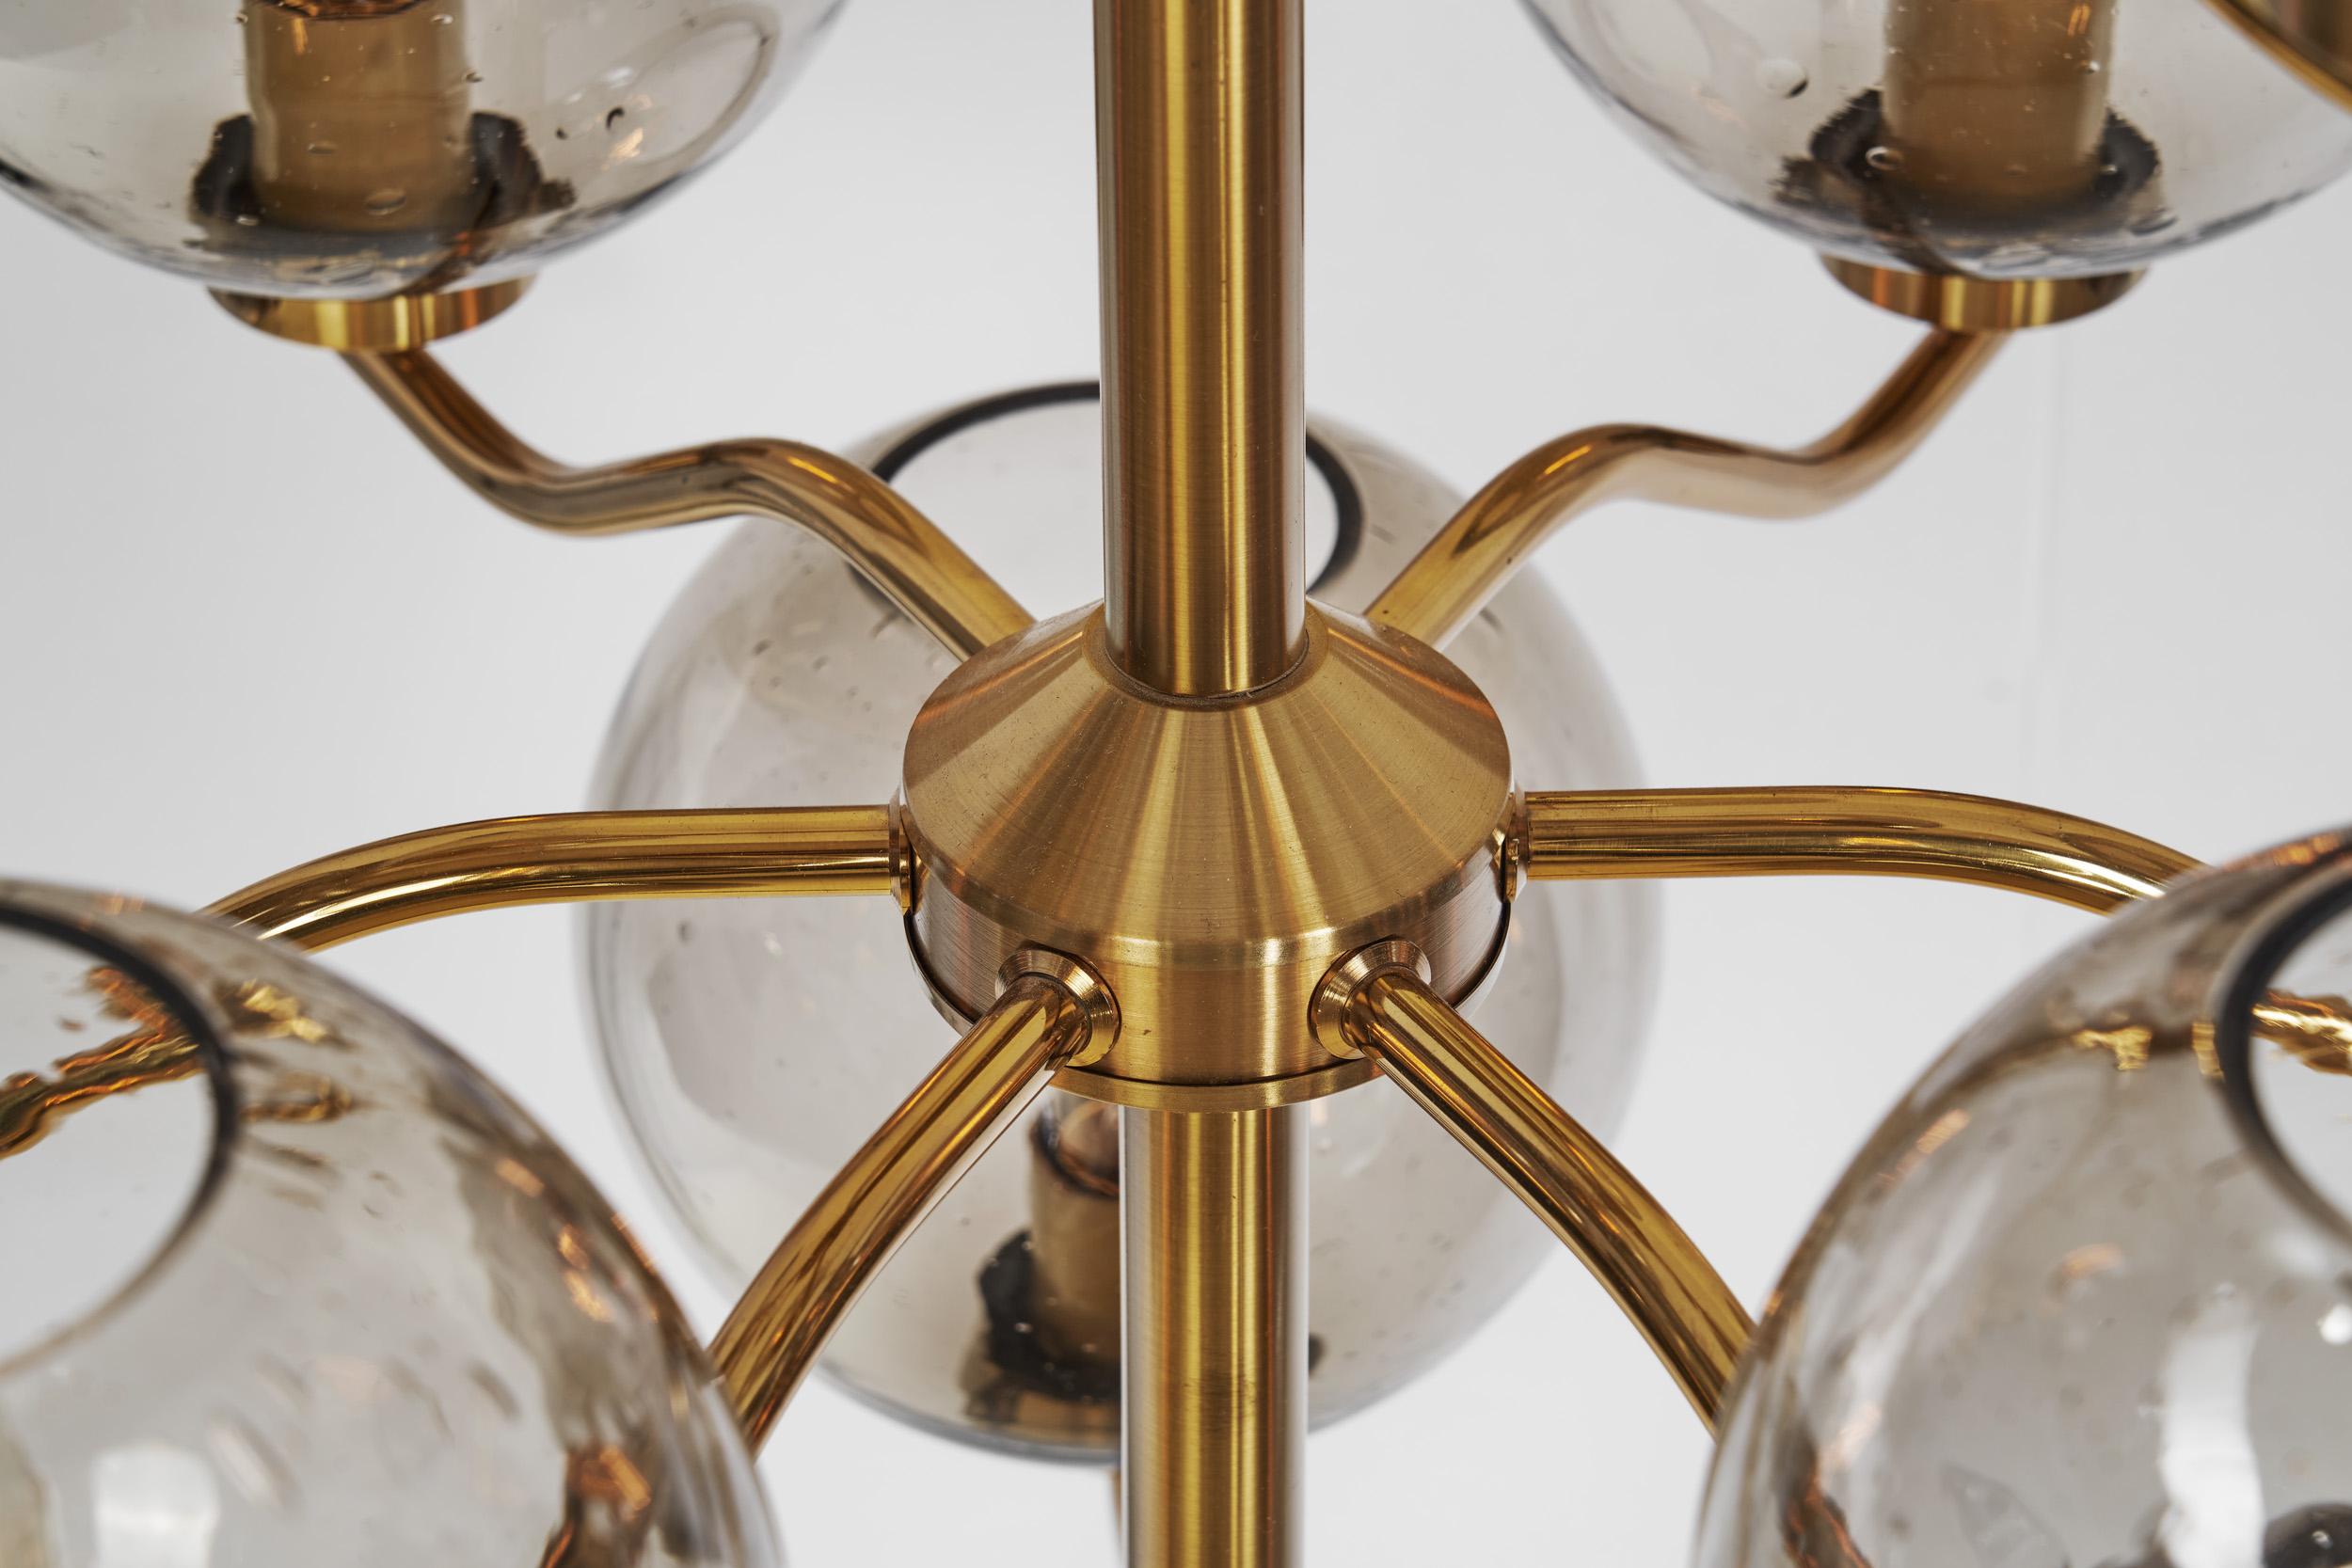 Holger Johansson Chandeliers with 12 Smoked Glass Shades, Sweden 1970s For Sale 5